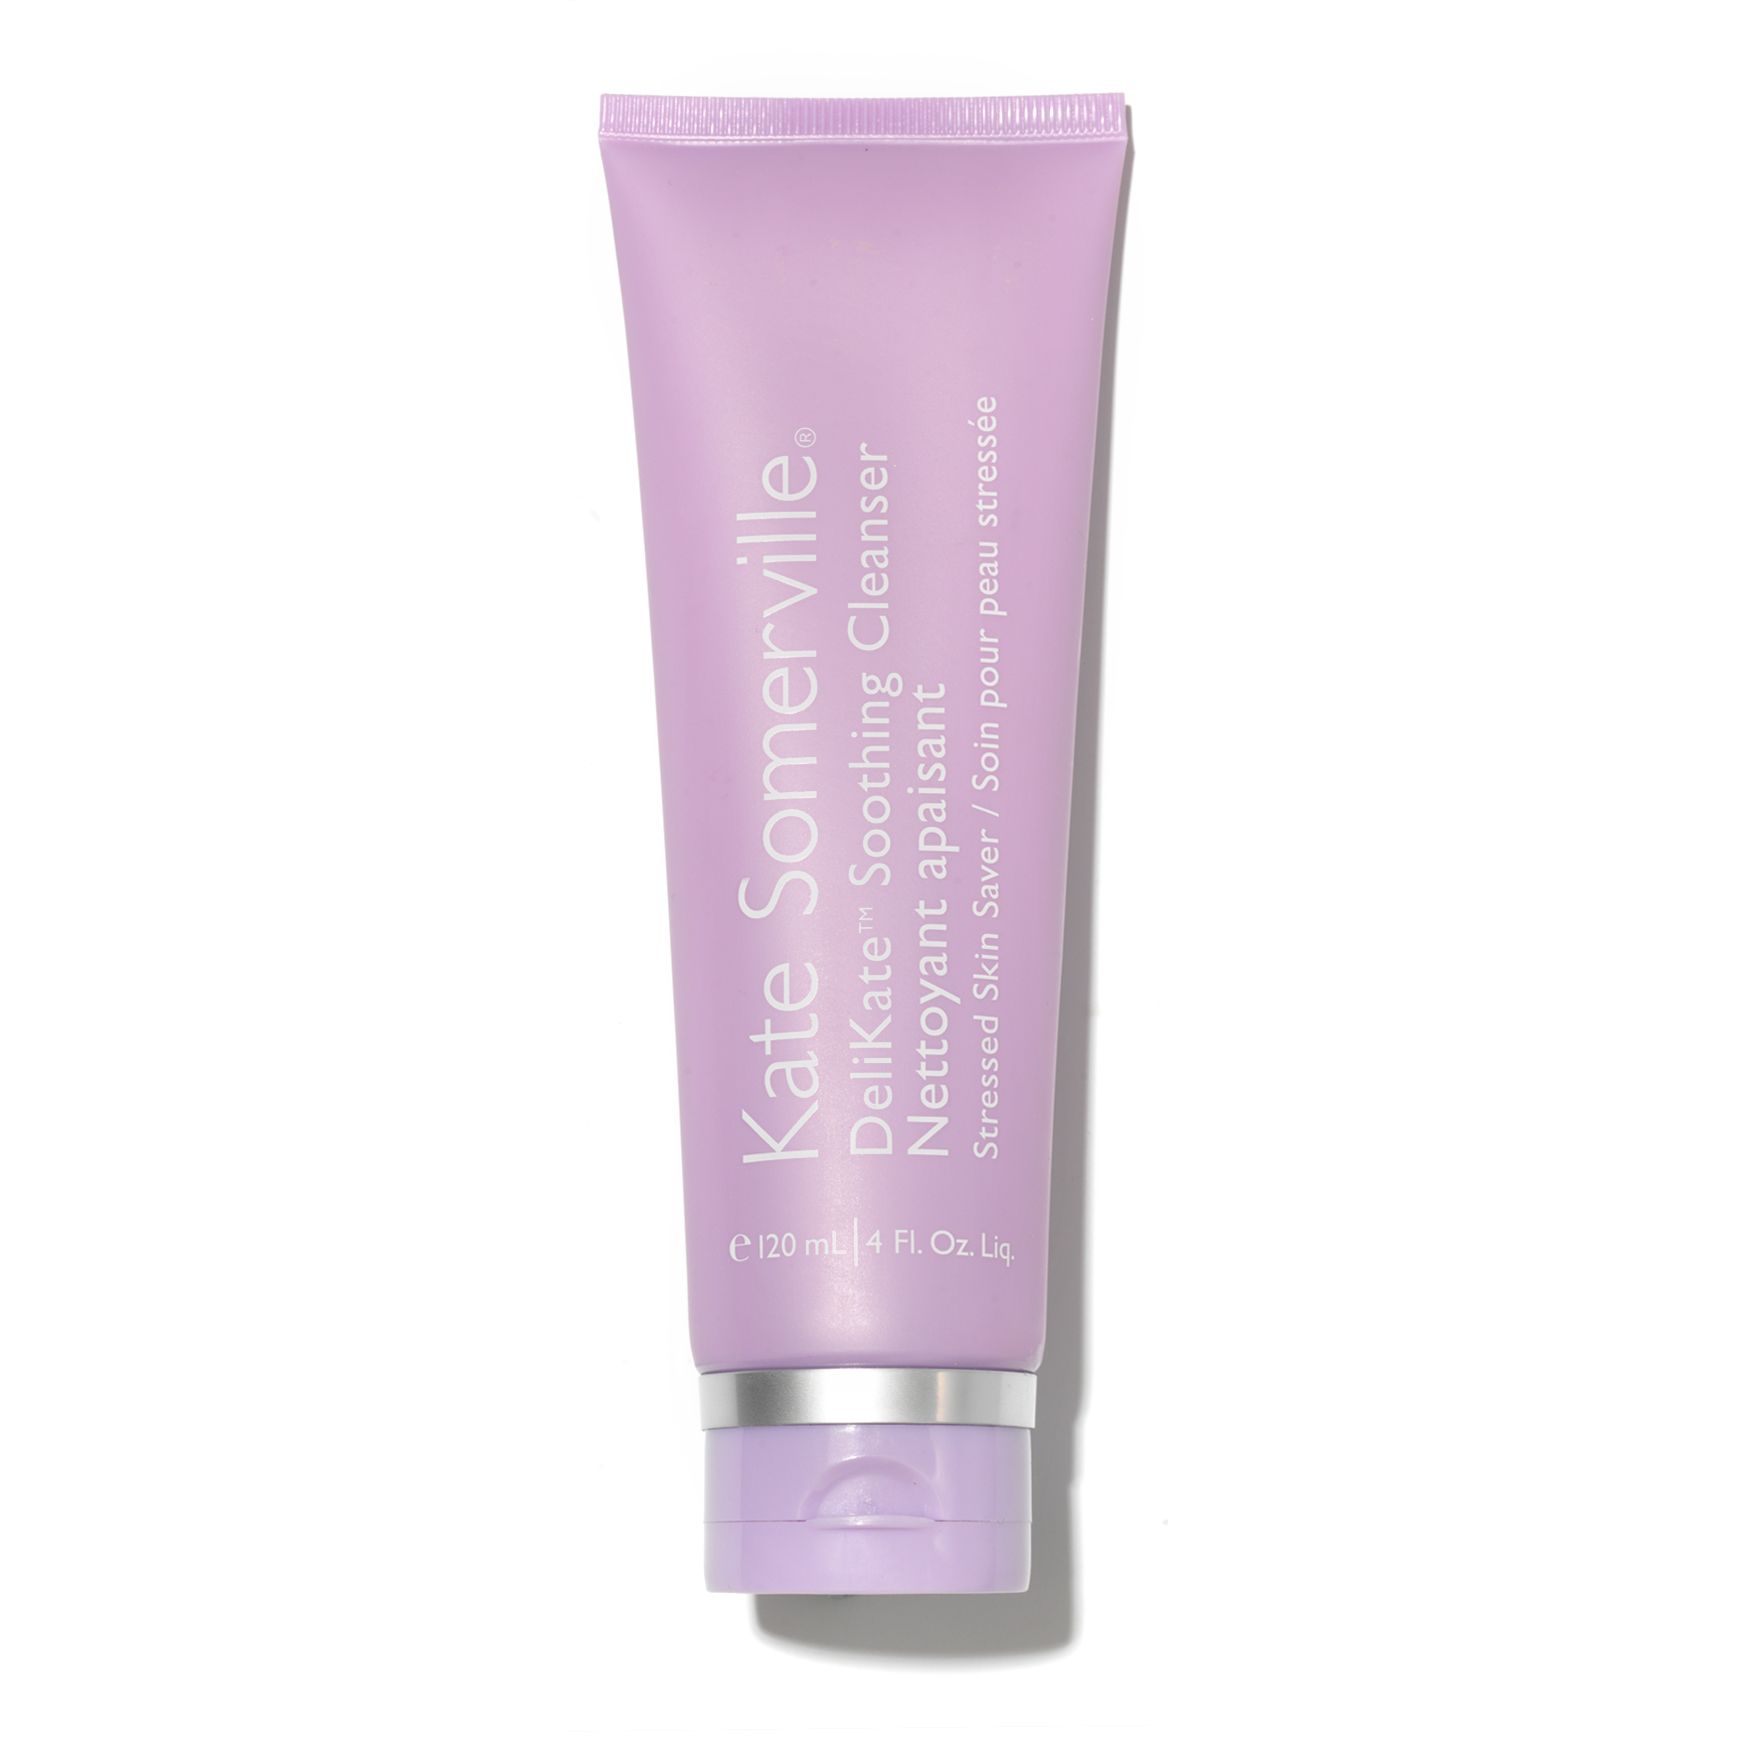 DeliKate Soothing Cleanser | Space NK (EU)